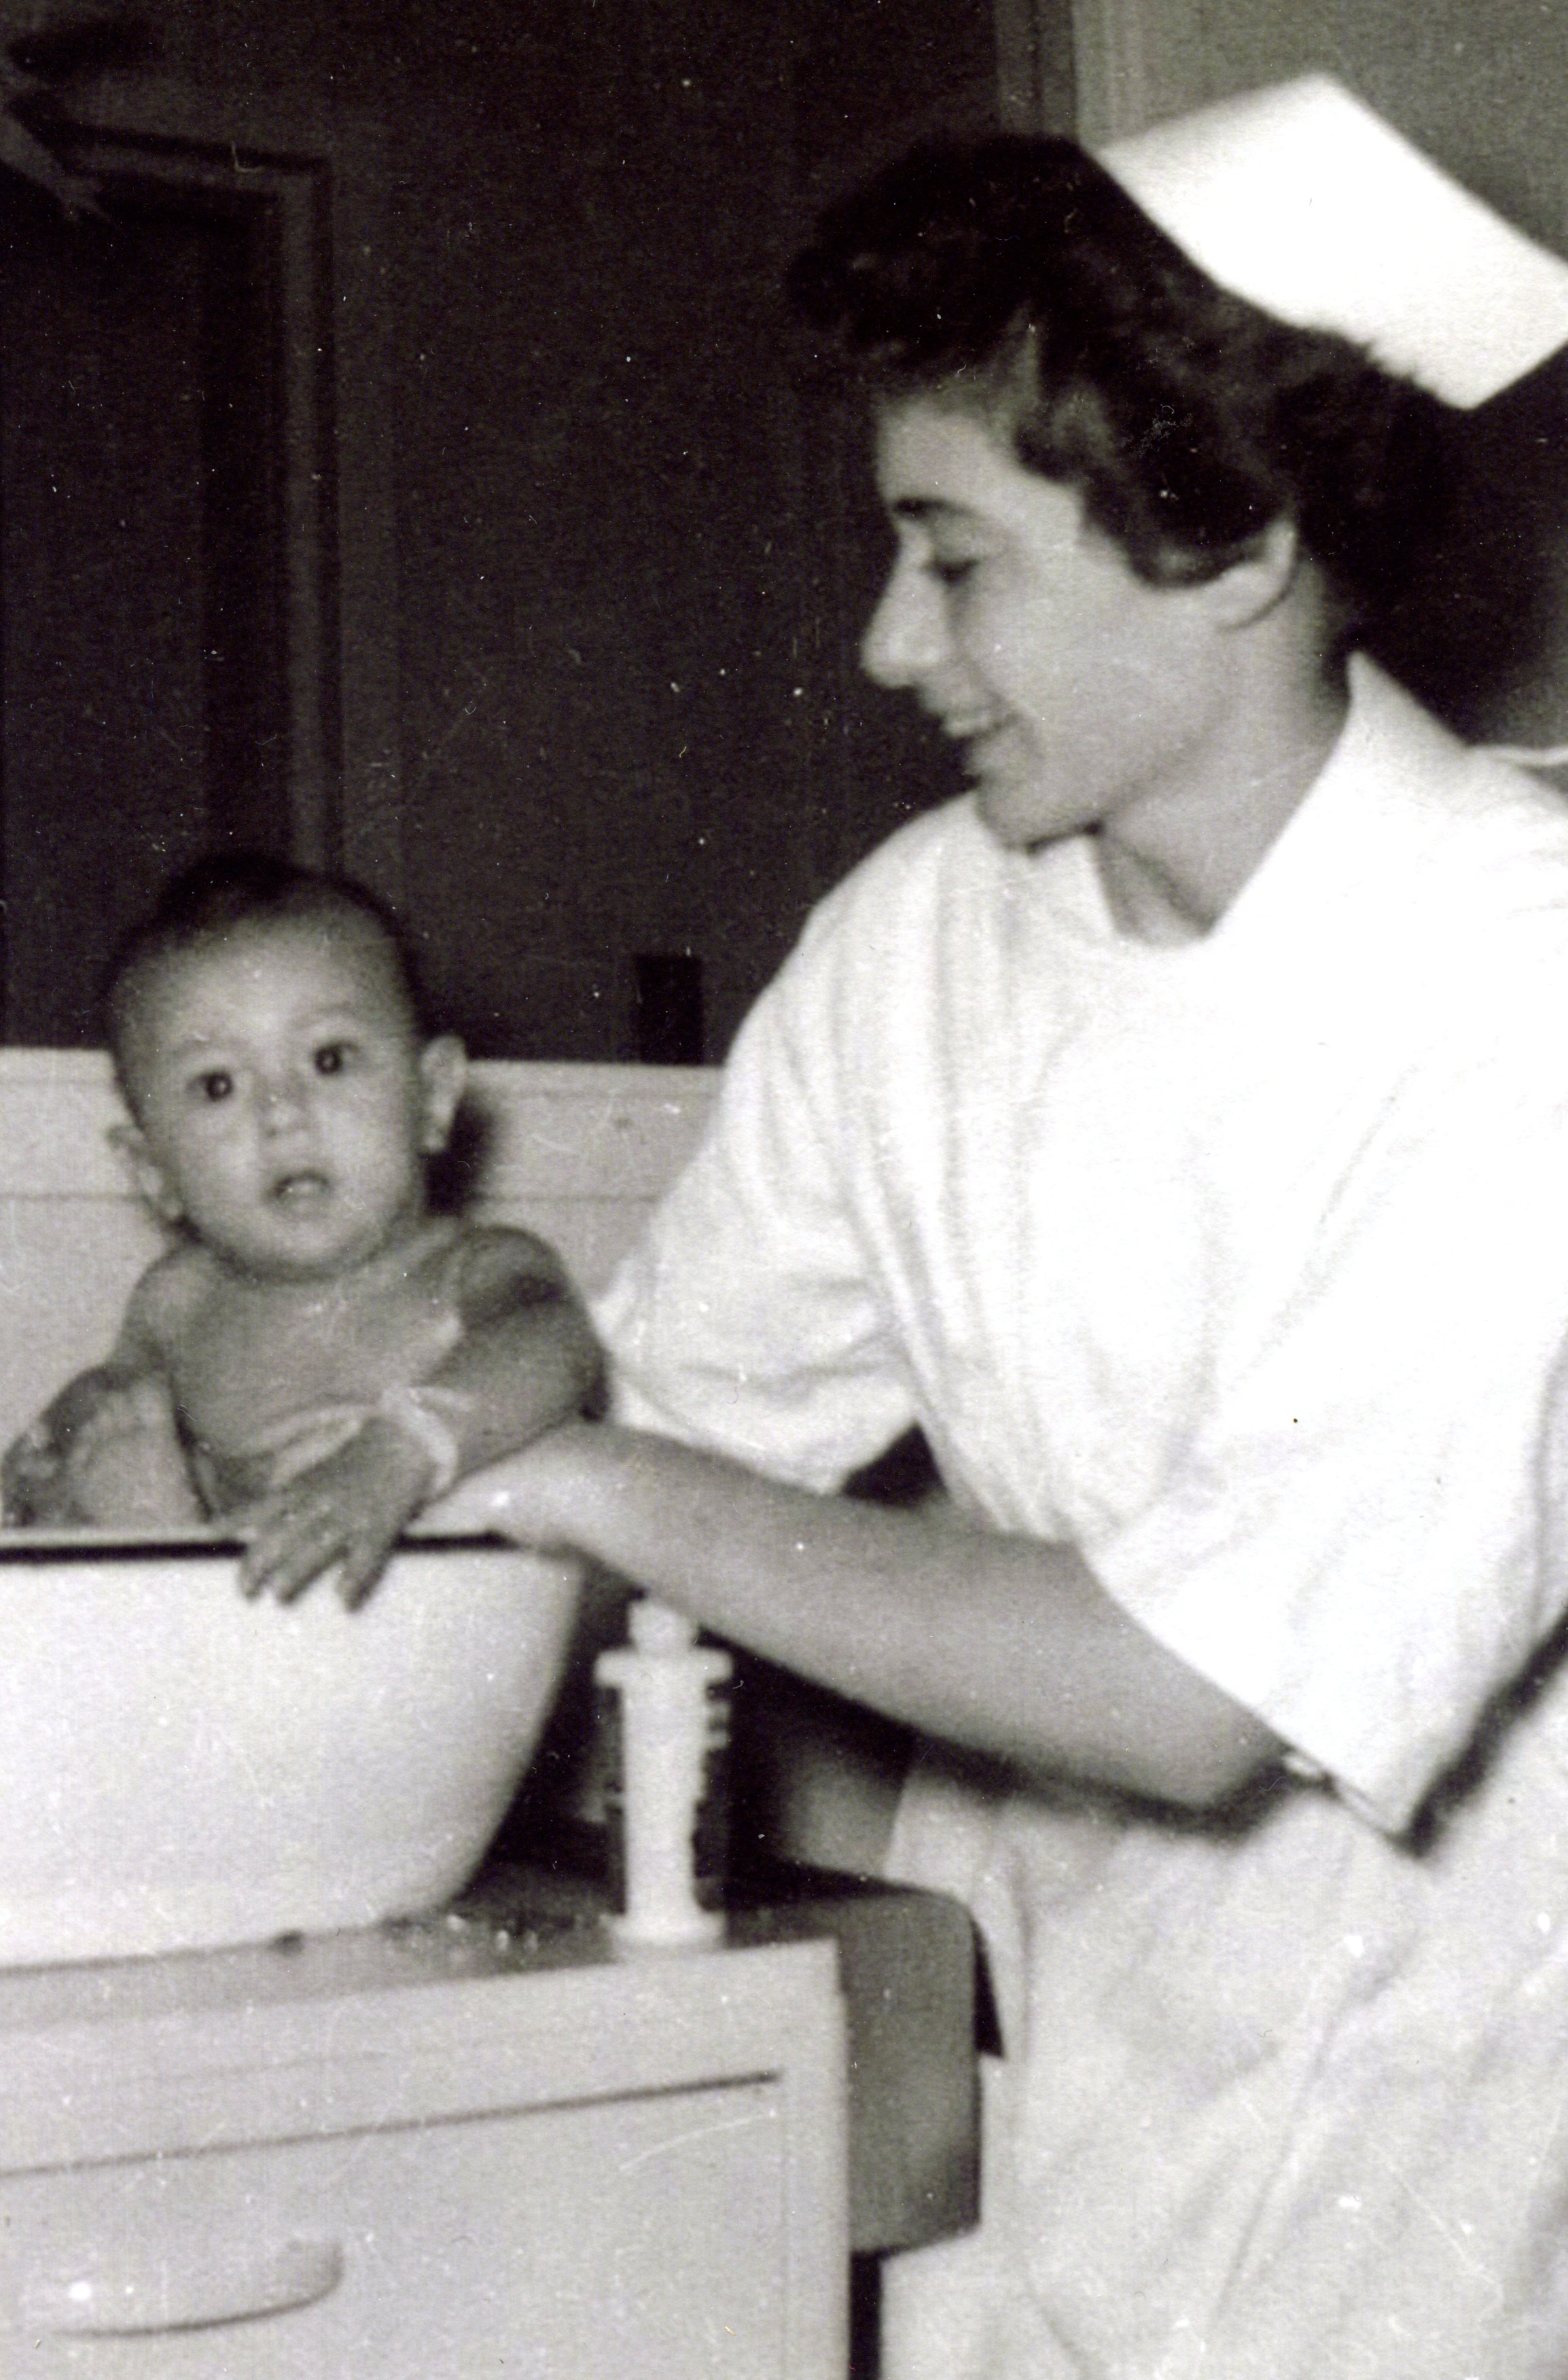 A smiling young woman in a nurses' uniform and cap bathes a baby in a basin.